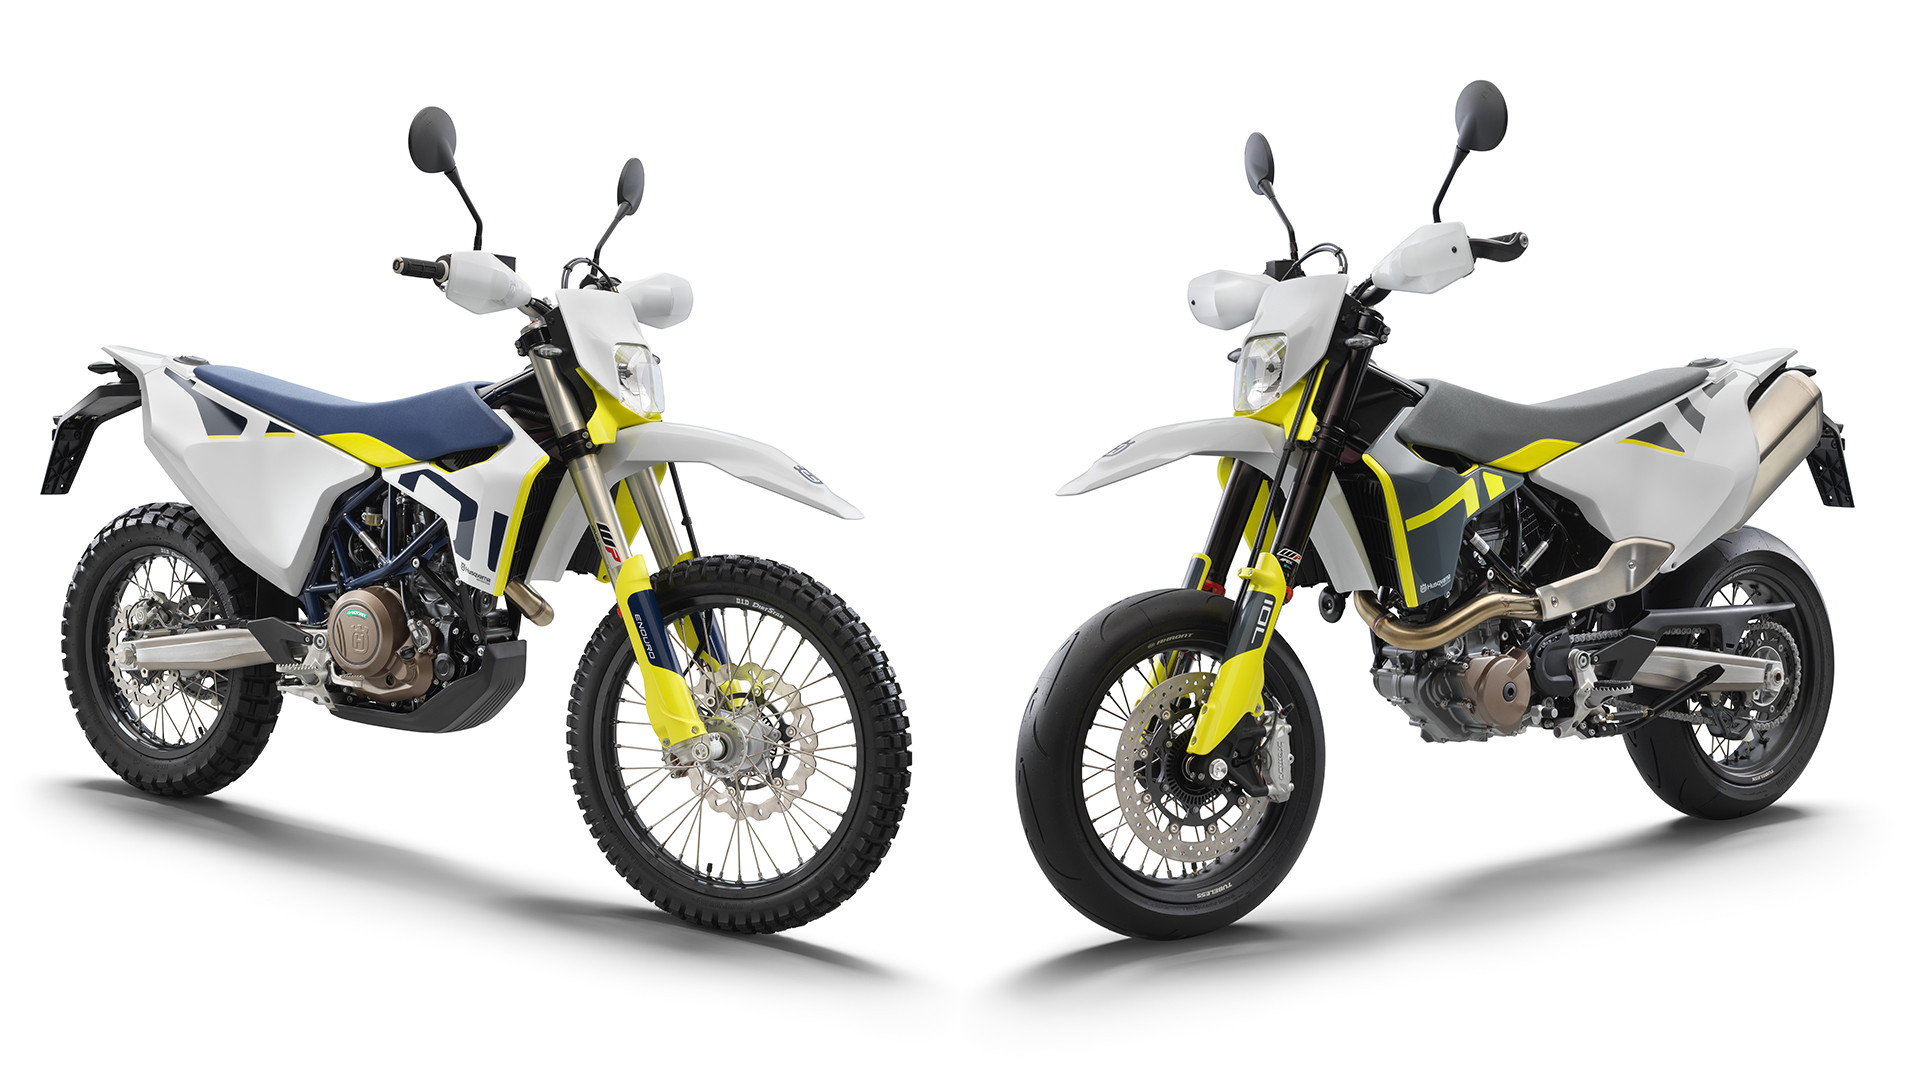 https://www.roadracingworld.com/wp-content/uploads/2021/01/2021-701-ENDURO-AND-701-SUPERMOTO-AVAILABLE-NOW_1611085309.jpg